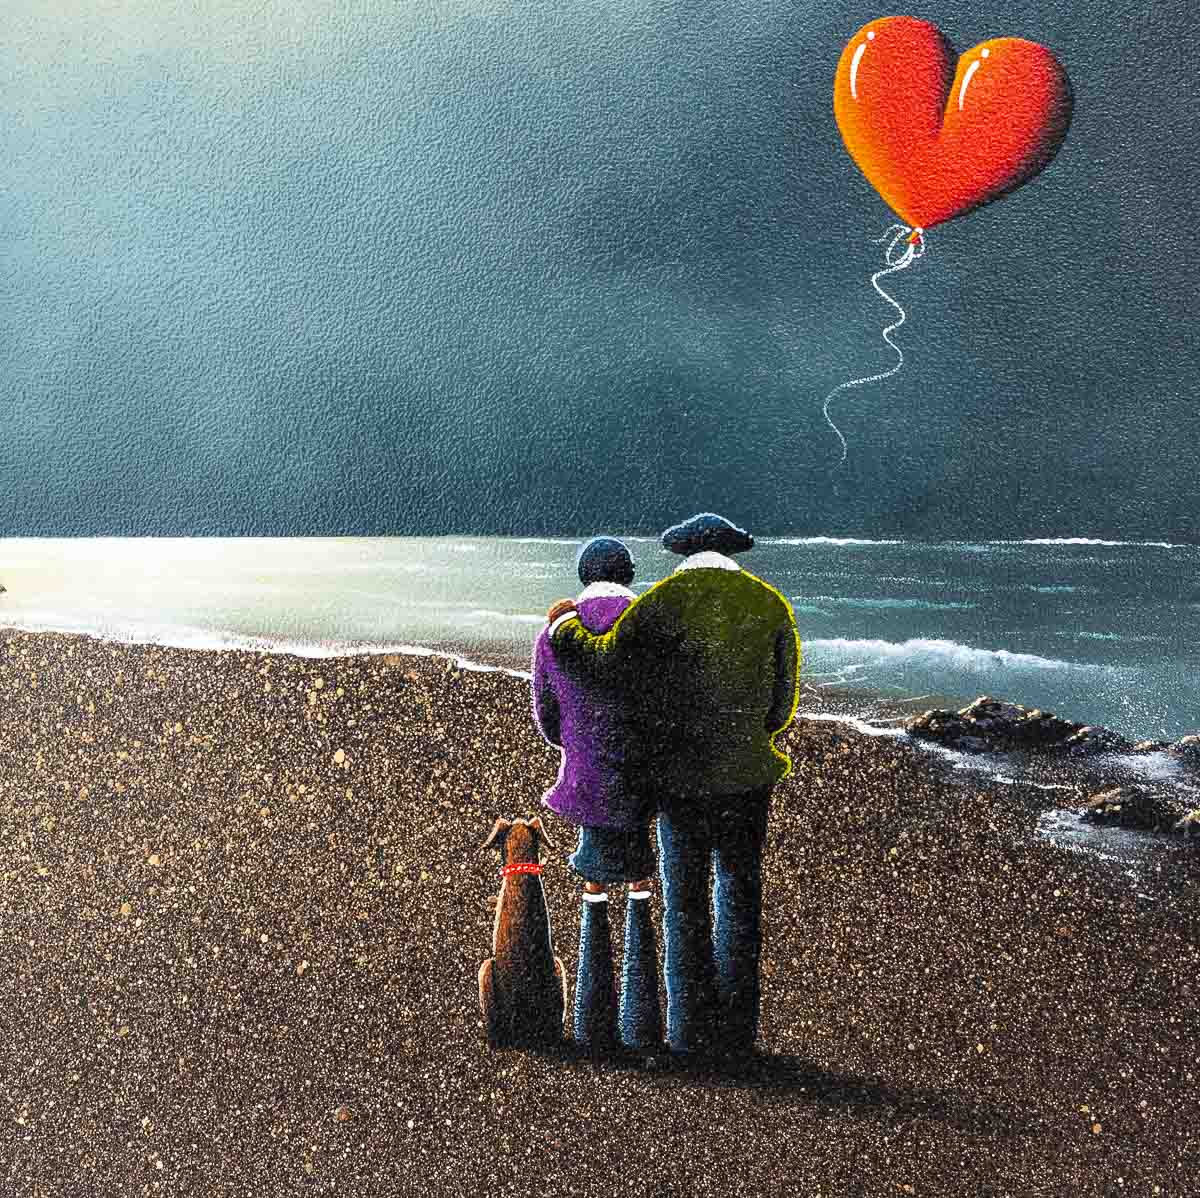 I'll Always Be By Your Side - Original - HOLD BACK FOR DR SHOW David Renshaw Original